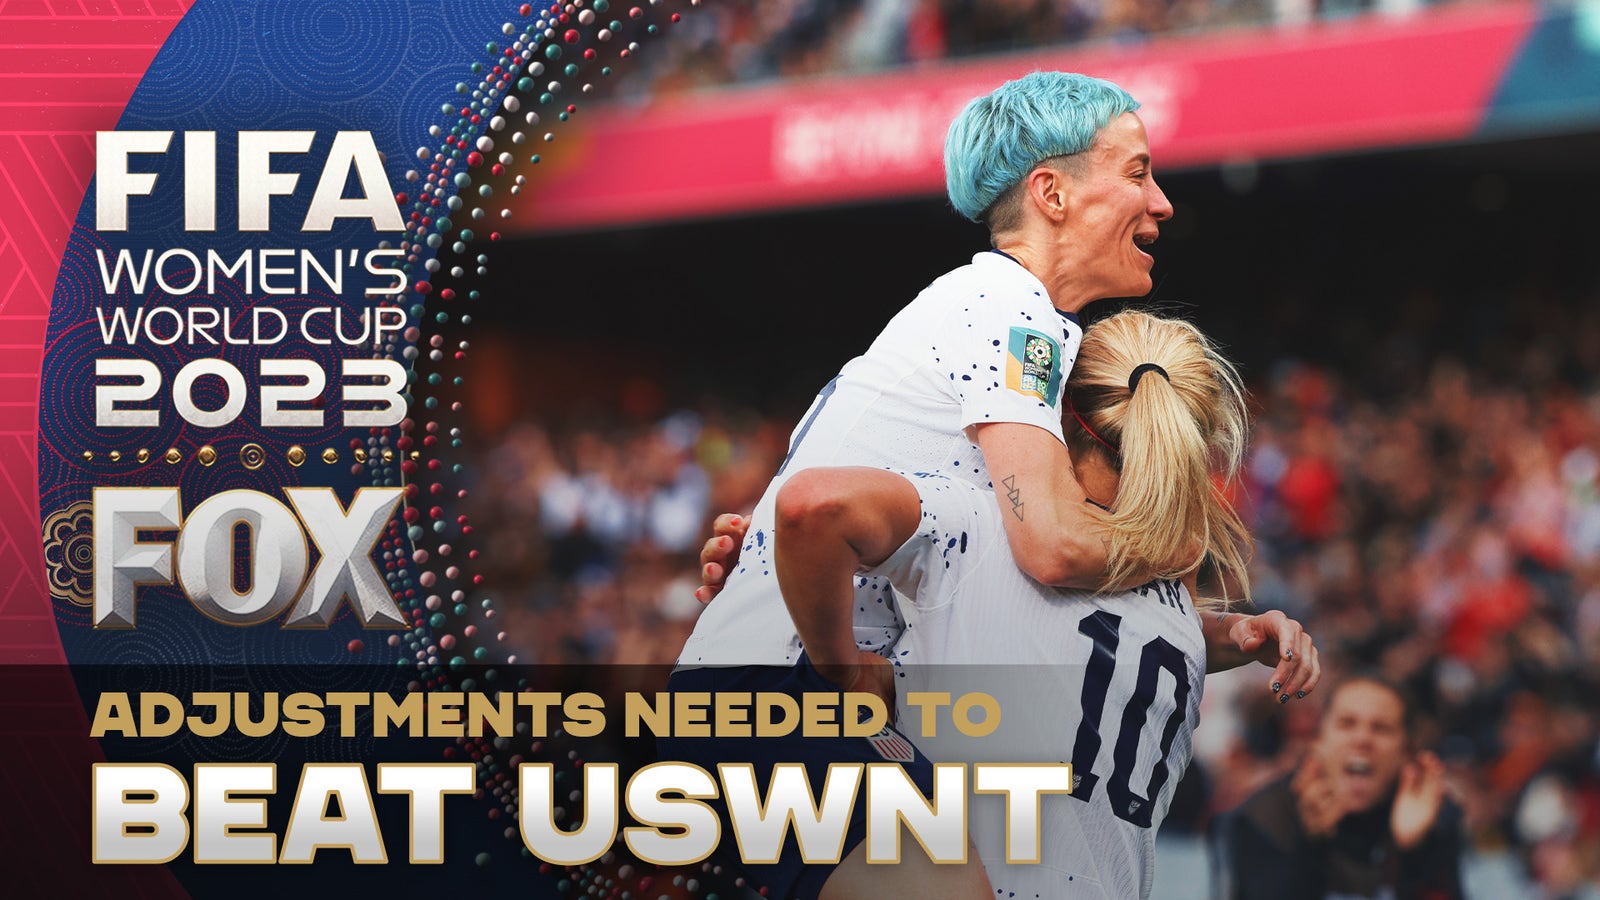 Do teams need to adjust how they play for USWNT?